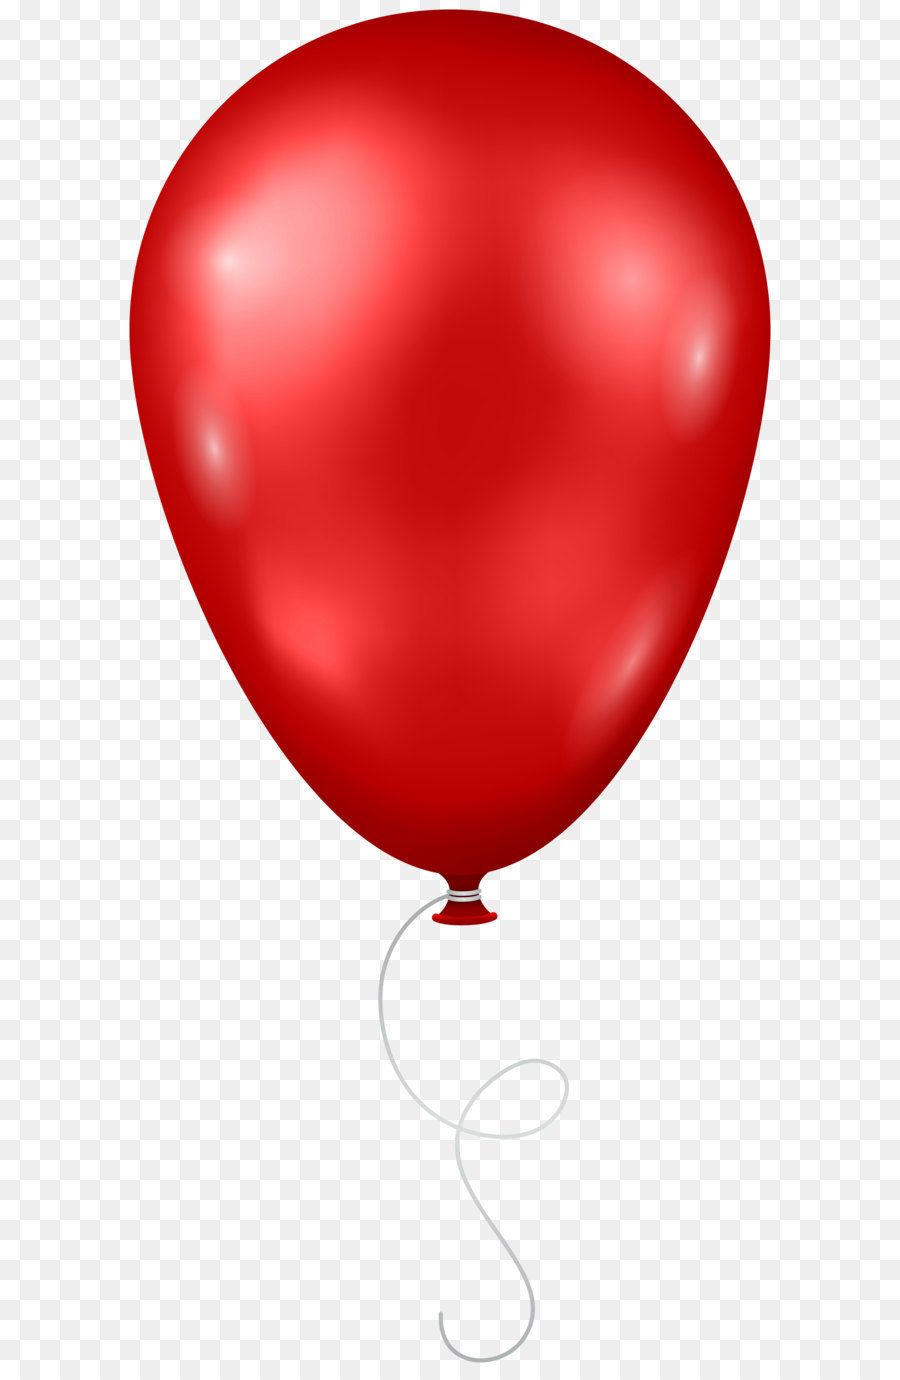 Image file formats Lossless compression - Red Balloon Transparent PNG Clip Art Image png download - 3790*8000 - Free Transparent Balloon png Download.